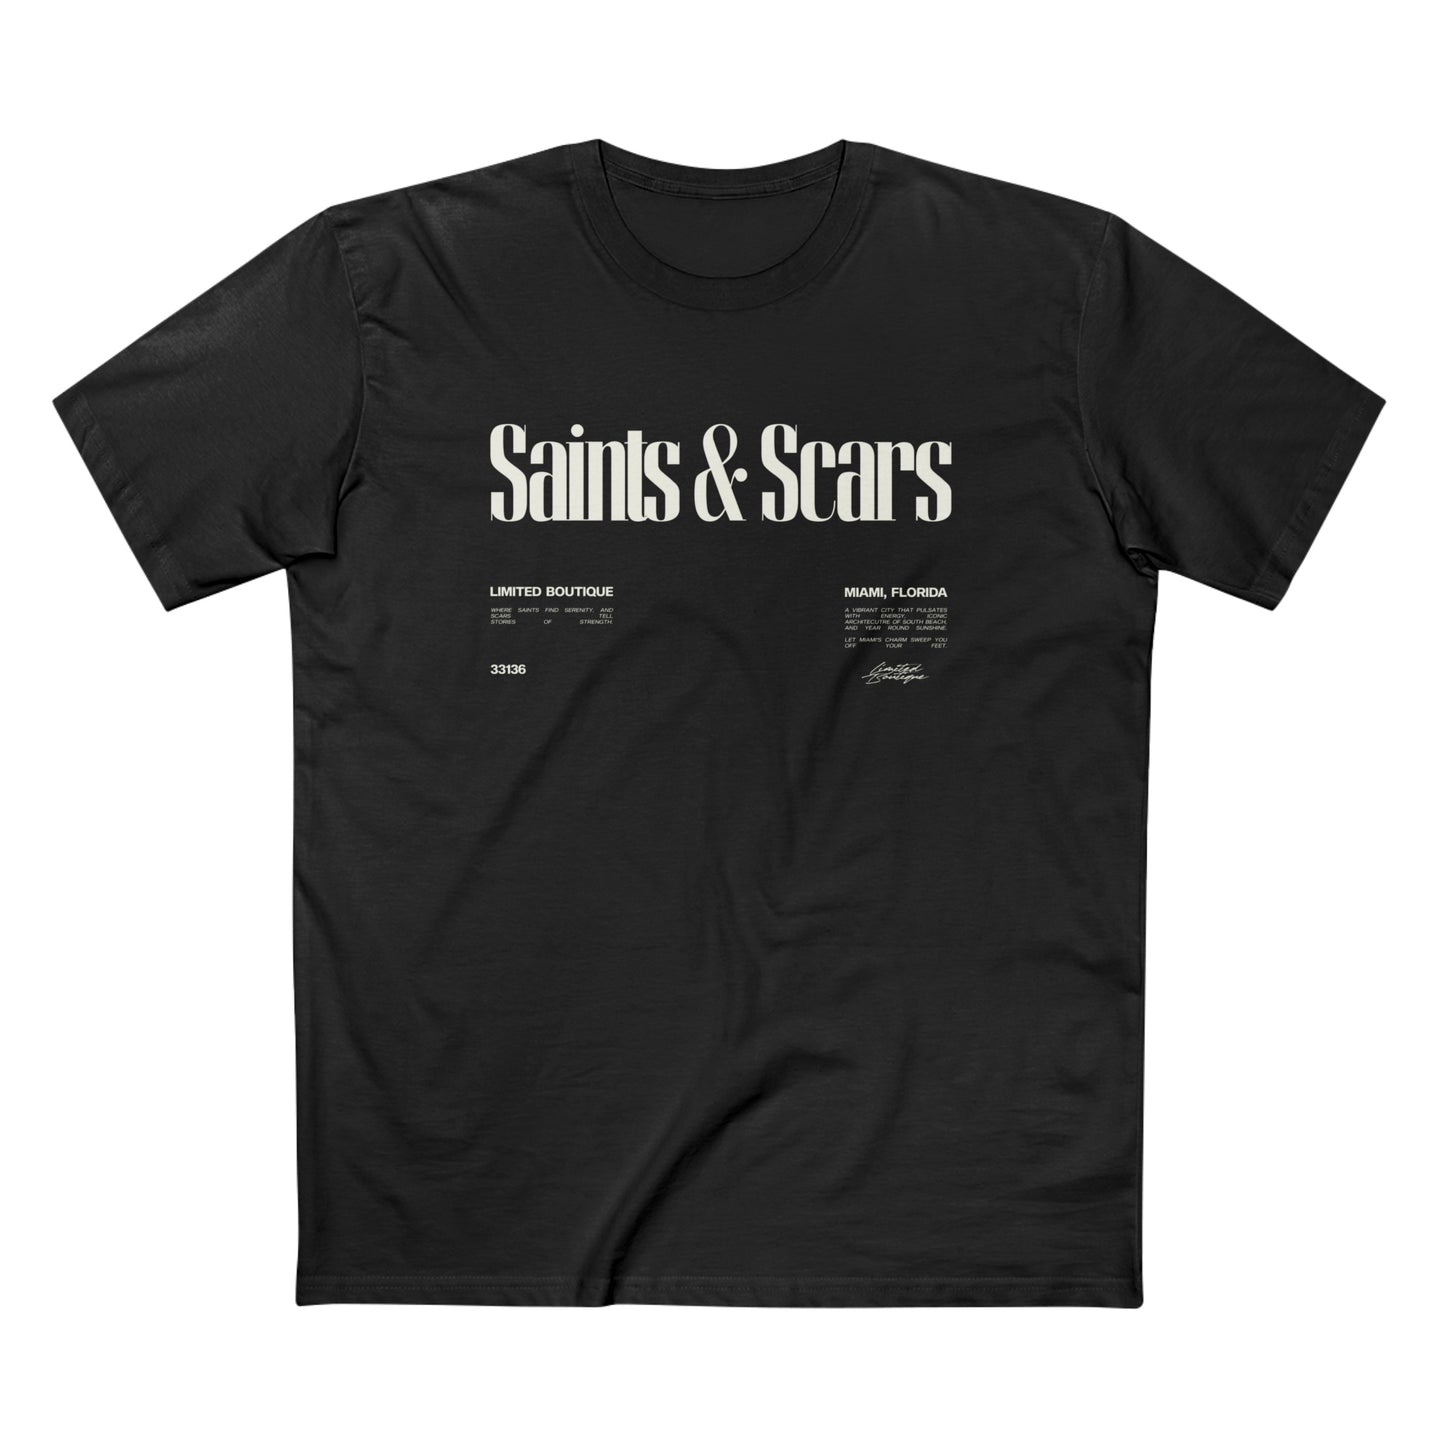 S&S Central Tee